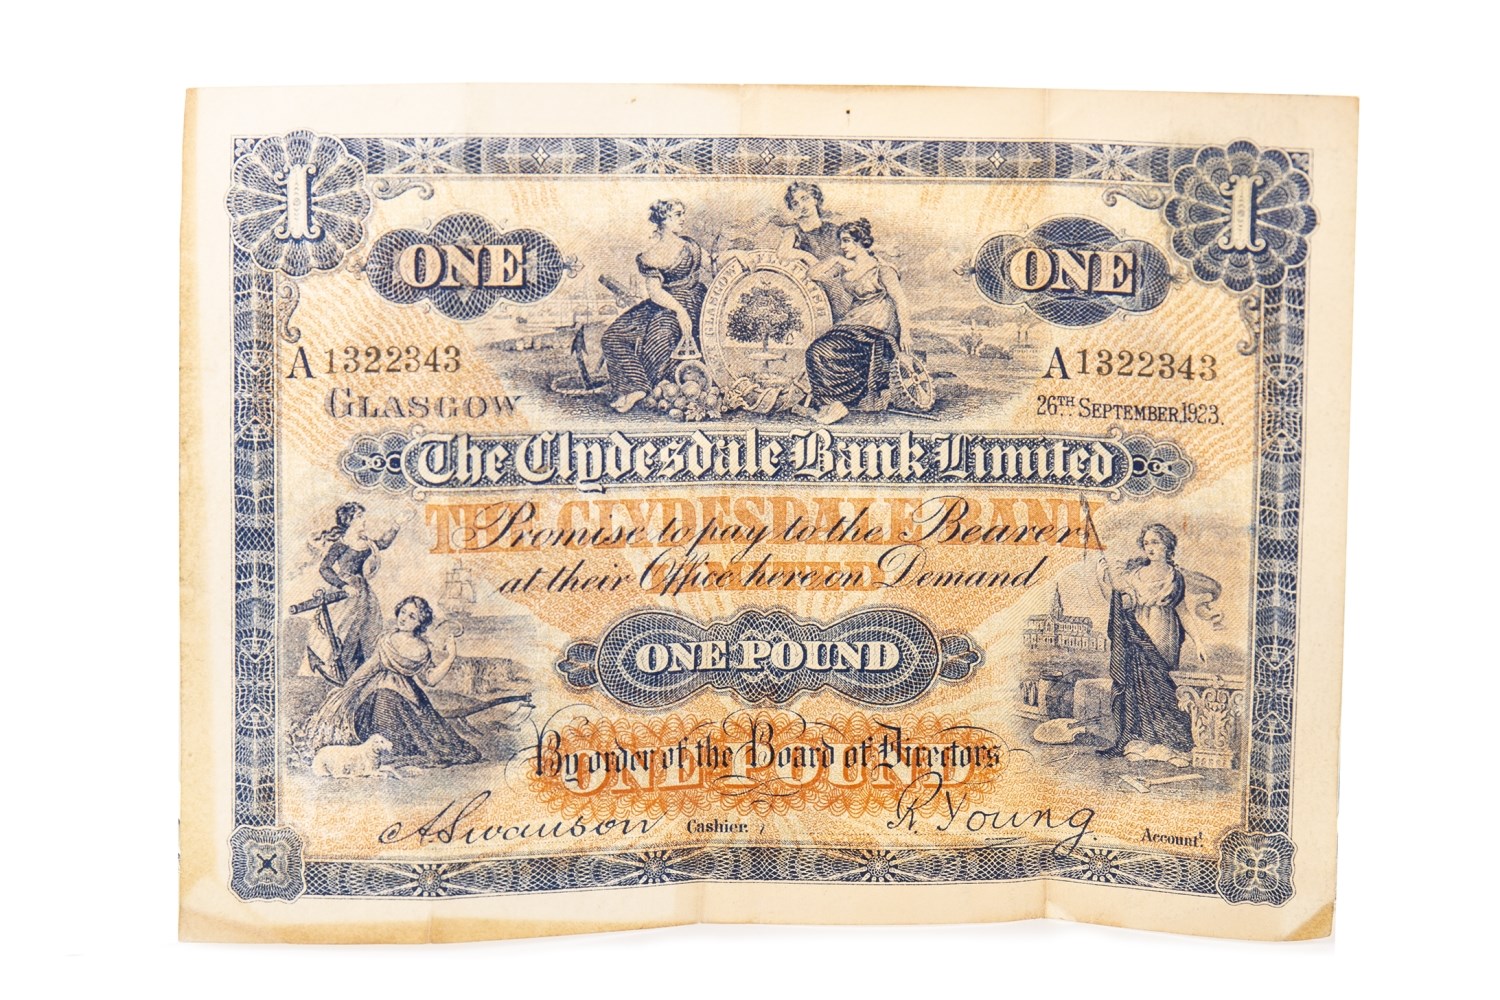 THE CLYDESDALE BANK LIMITED £1 ONE POUND NOTE, 1923